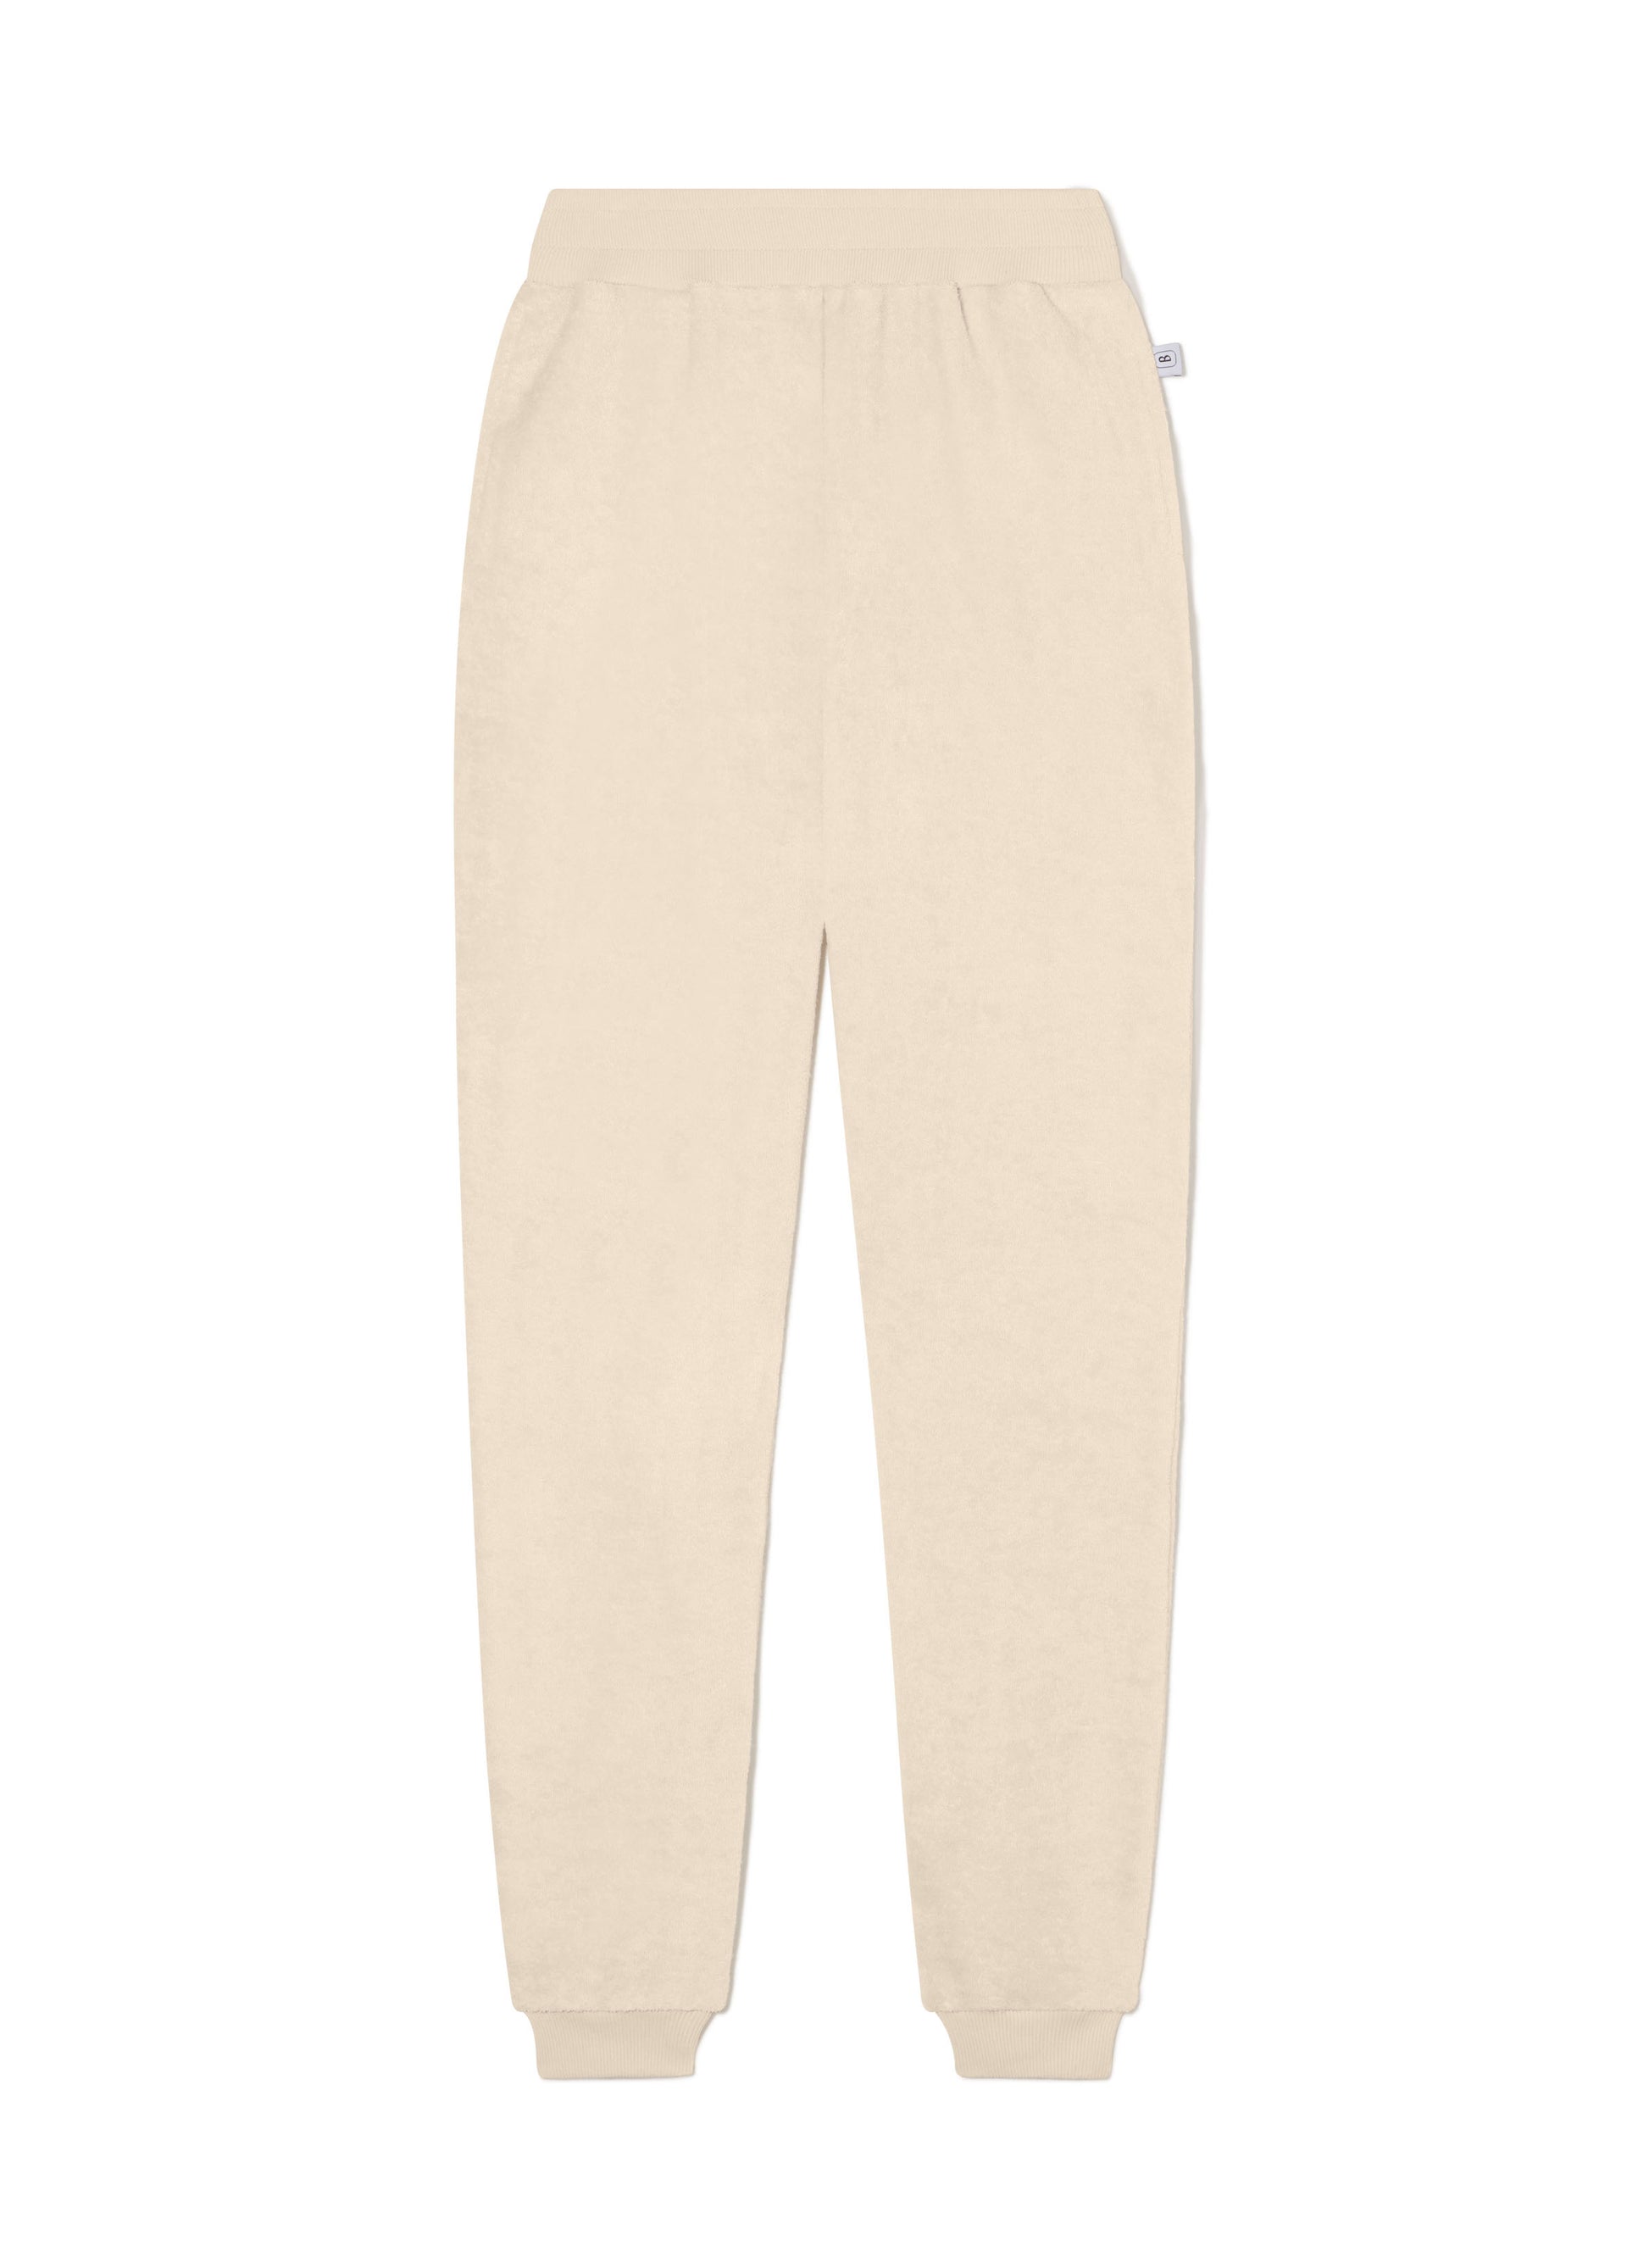 Women's Post Game Joggers, Sand / XS, Bottoms - Brownlee